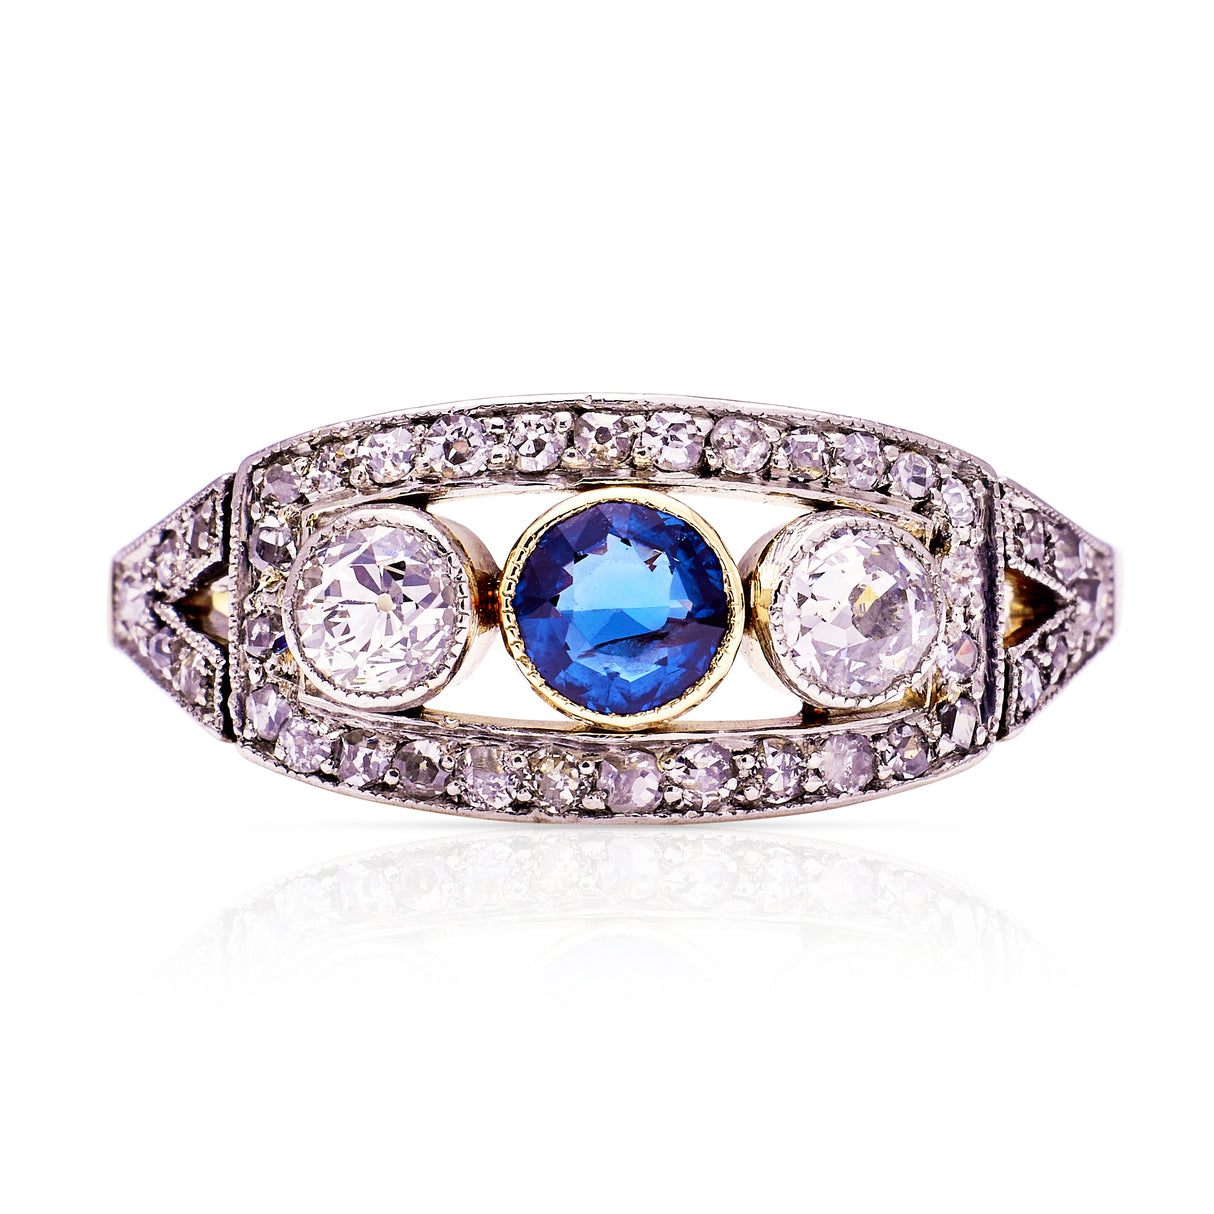 Antique, Belle Époque Sapphire and Diamond Three Stone Ring, 18ct Yellow Gold and Platinum front view